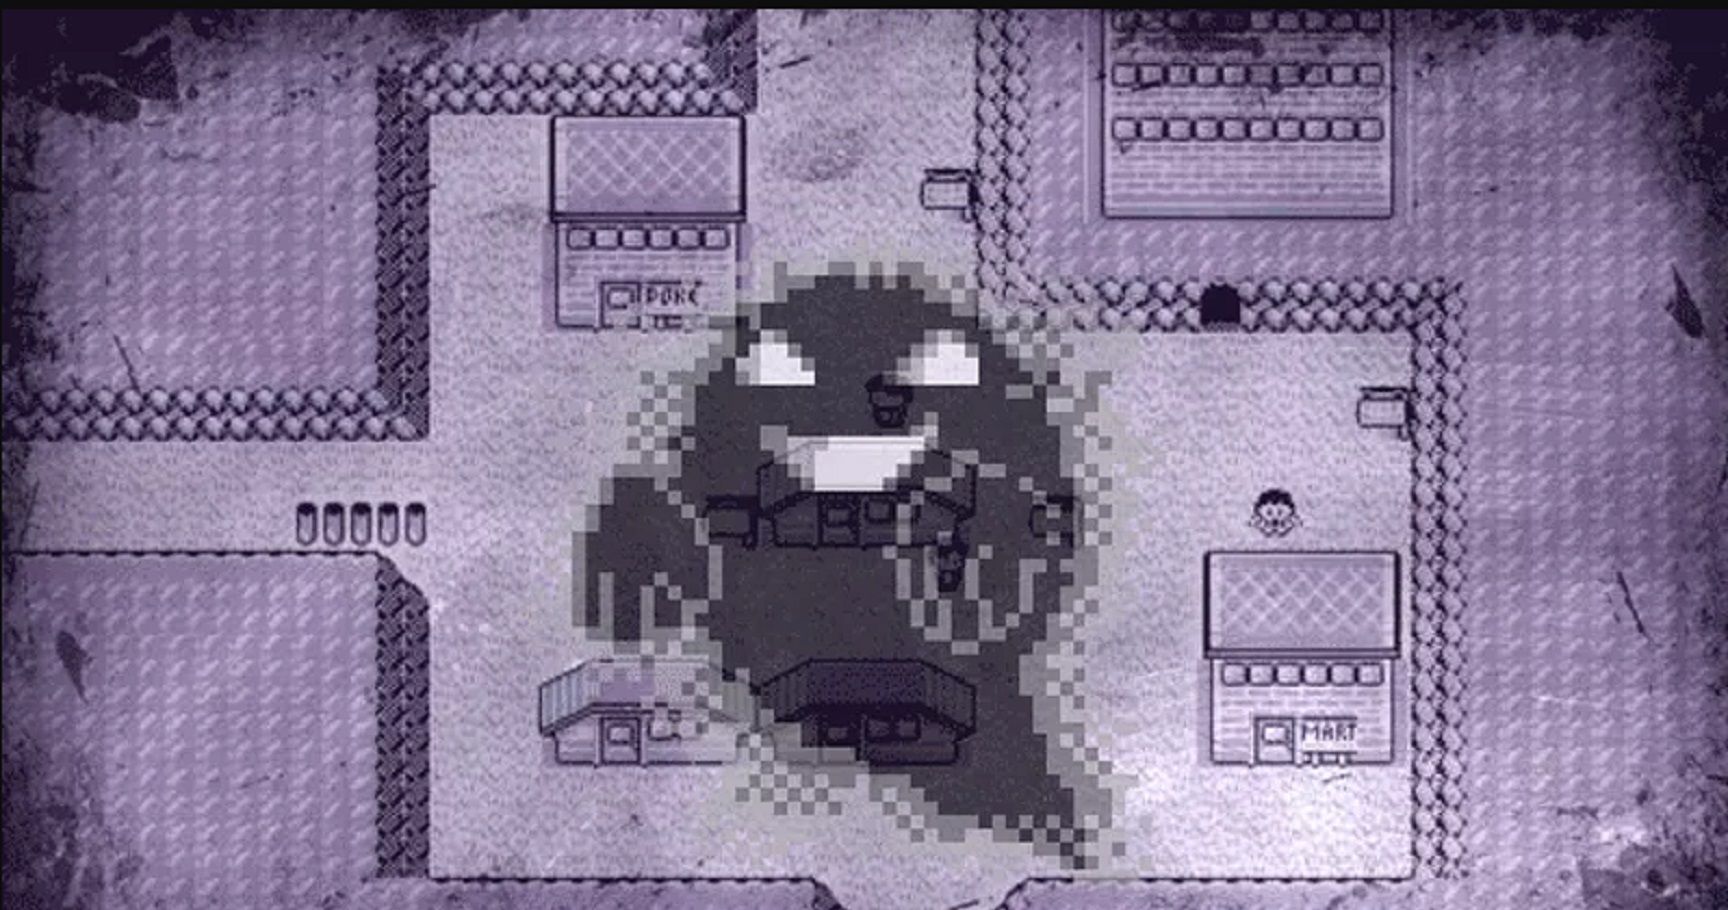 Pokémons Lavender Town Revealed Just In Time For Halloween